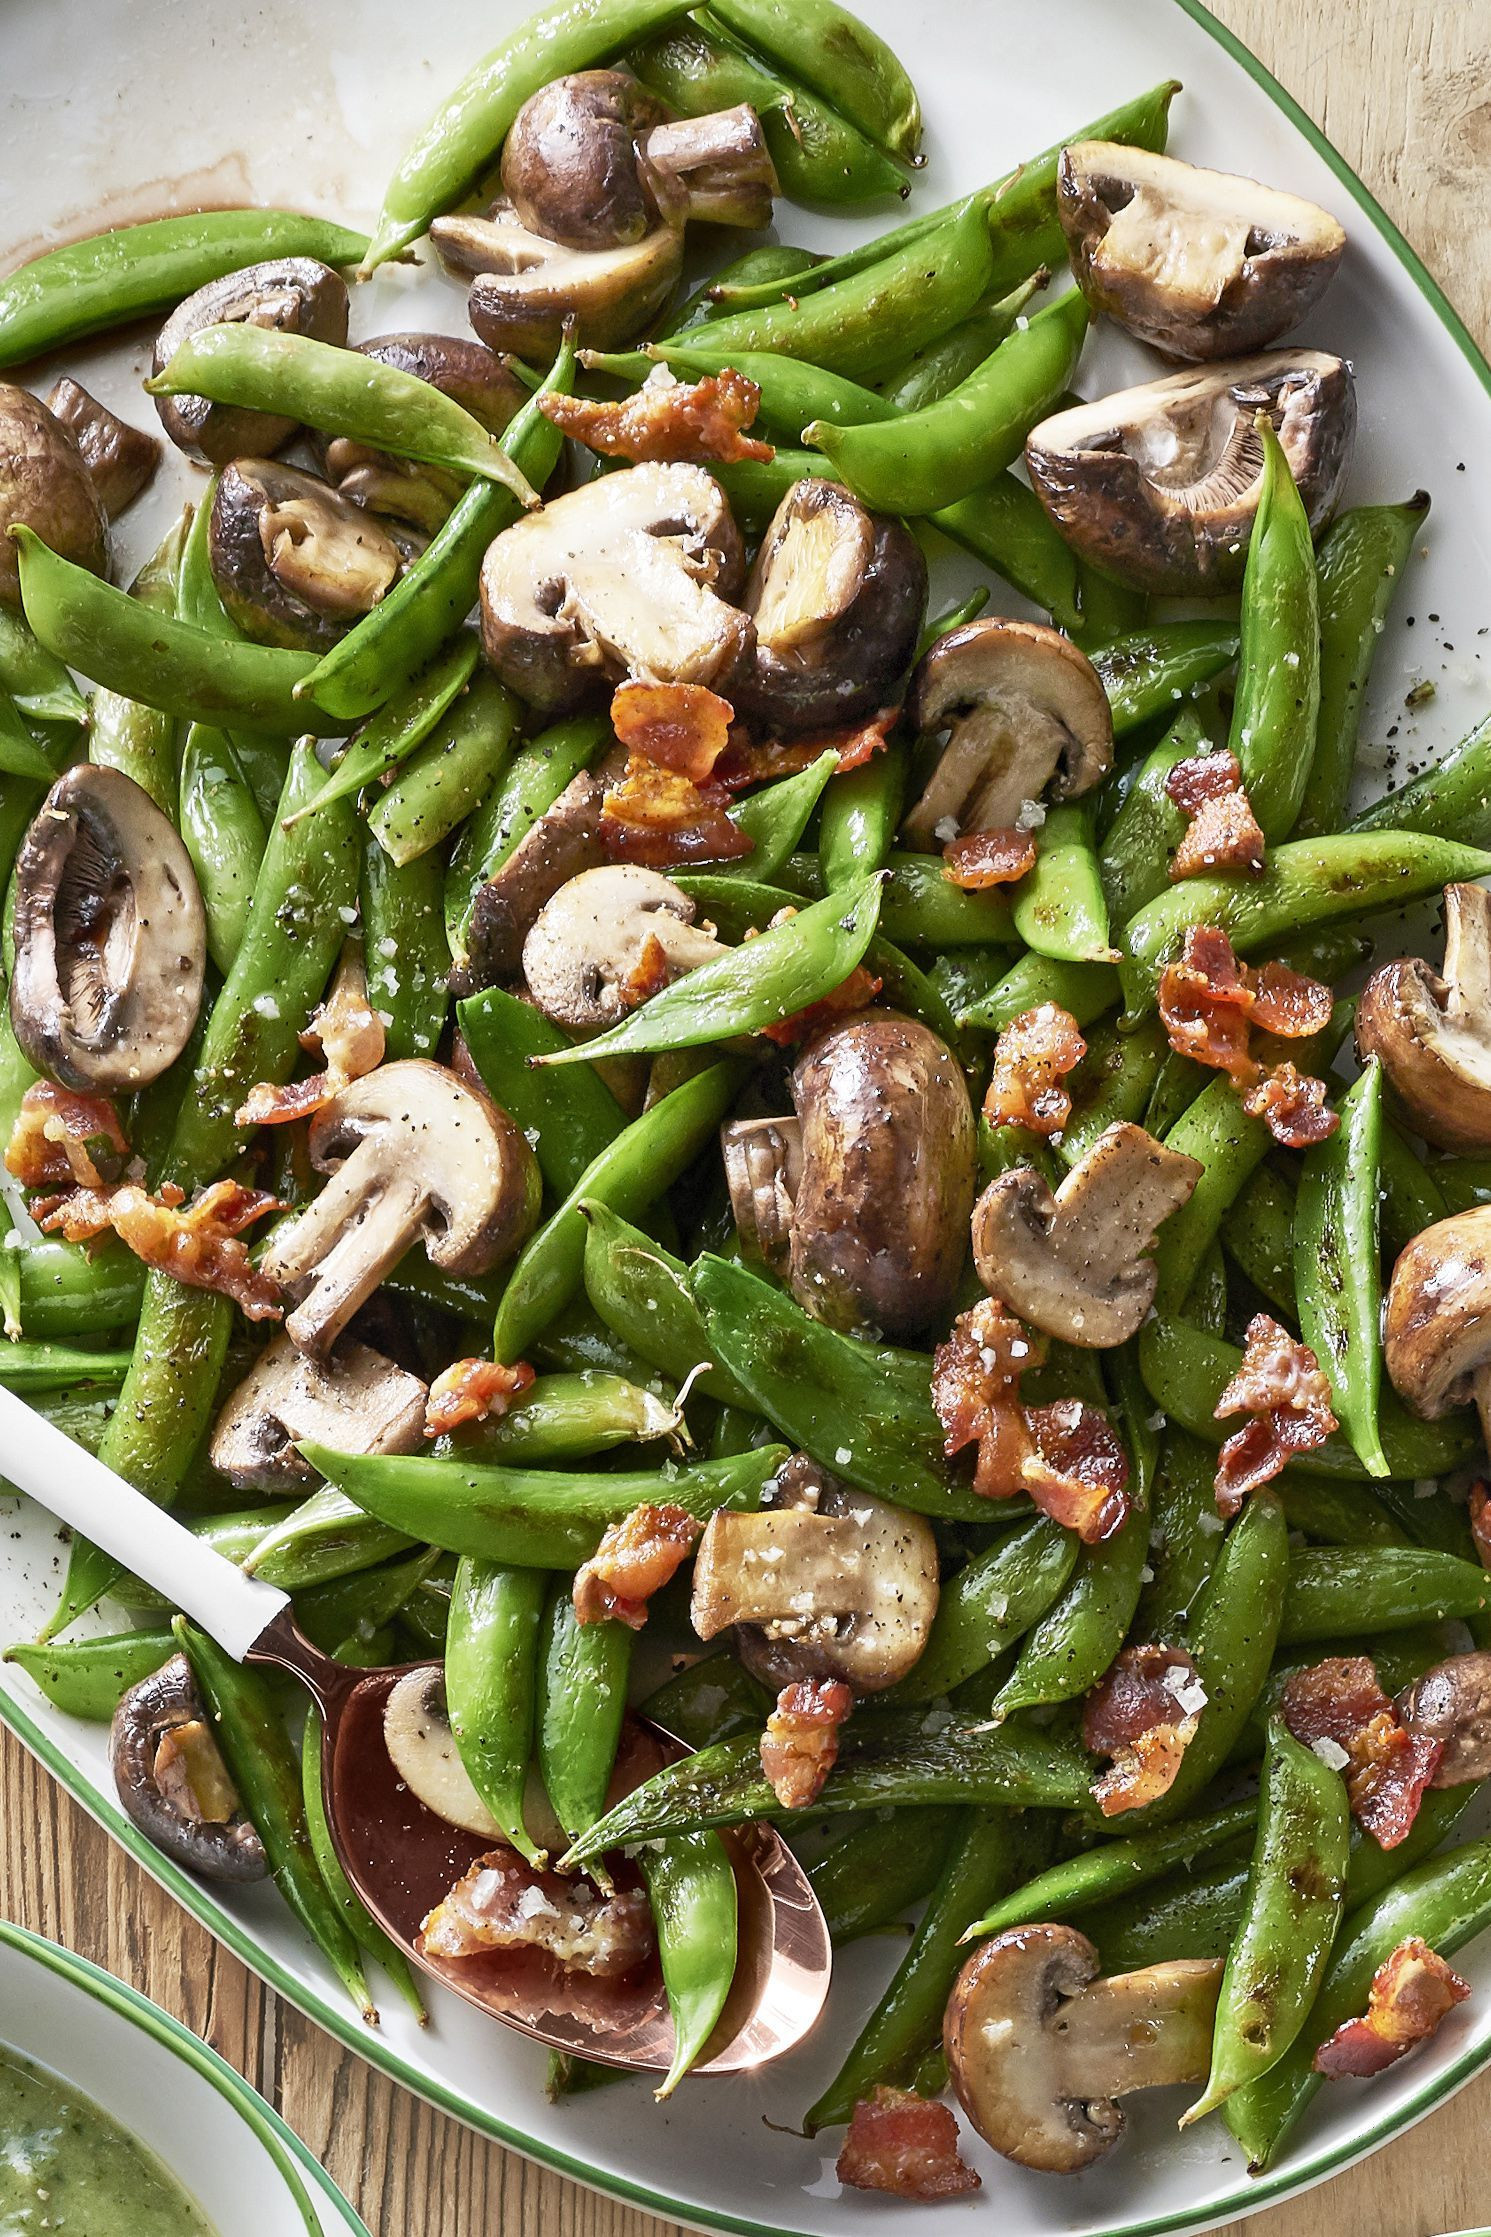 Easter Dinner Vegetable Recipes
 These Easter Side Dishes Are Bound to Upstage Your Ham